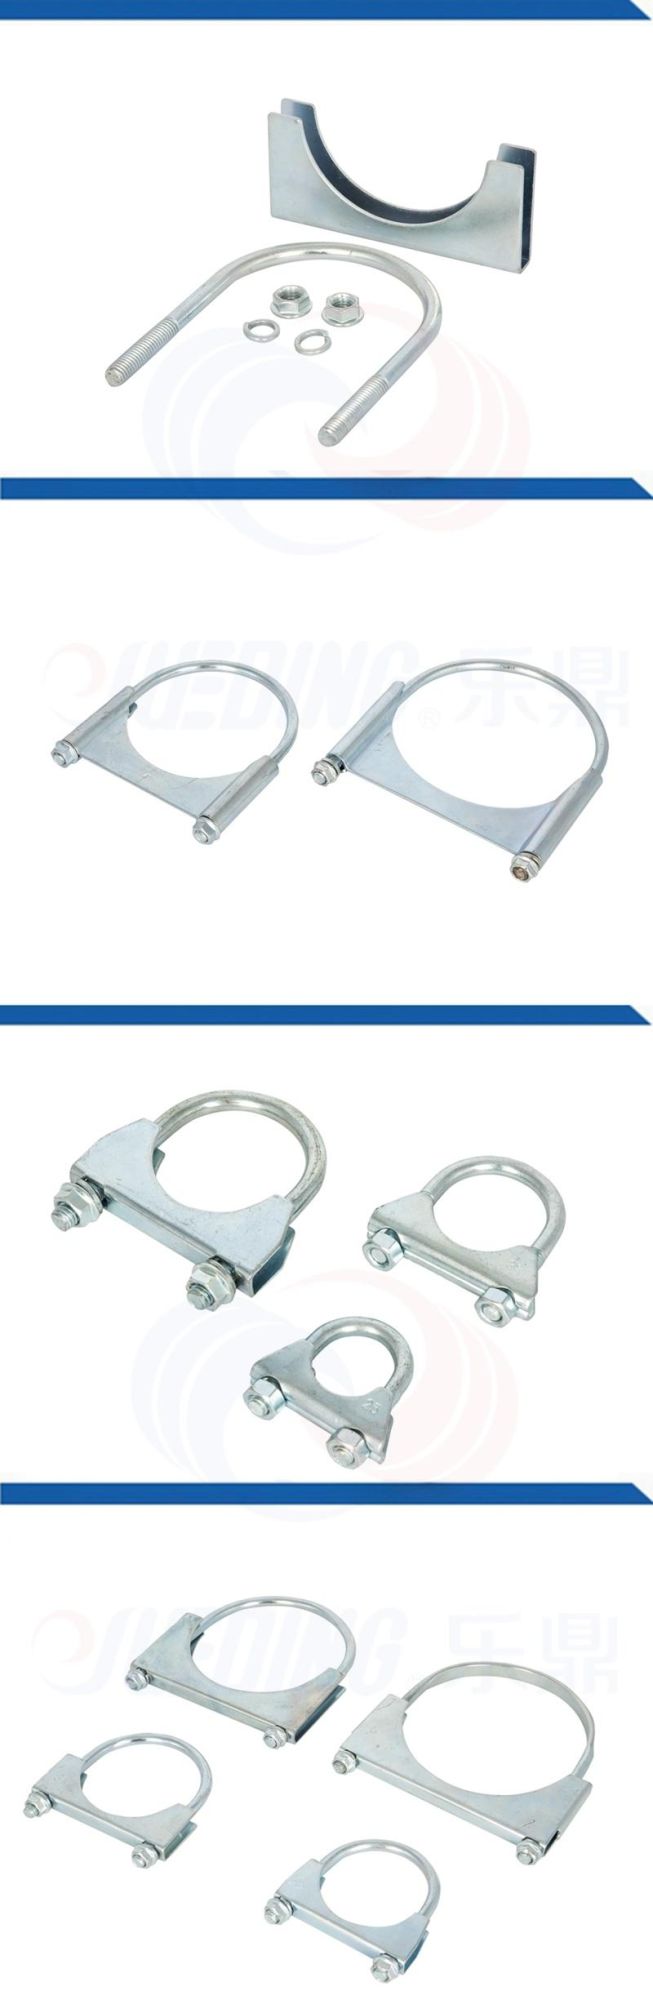 Automotive U Type Hose Clamps for Exhaust Pipe Joint